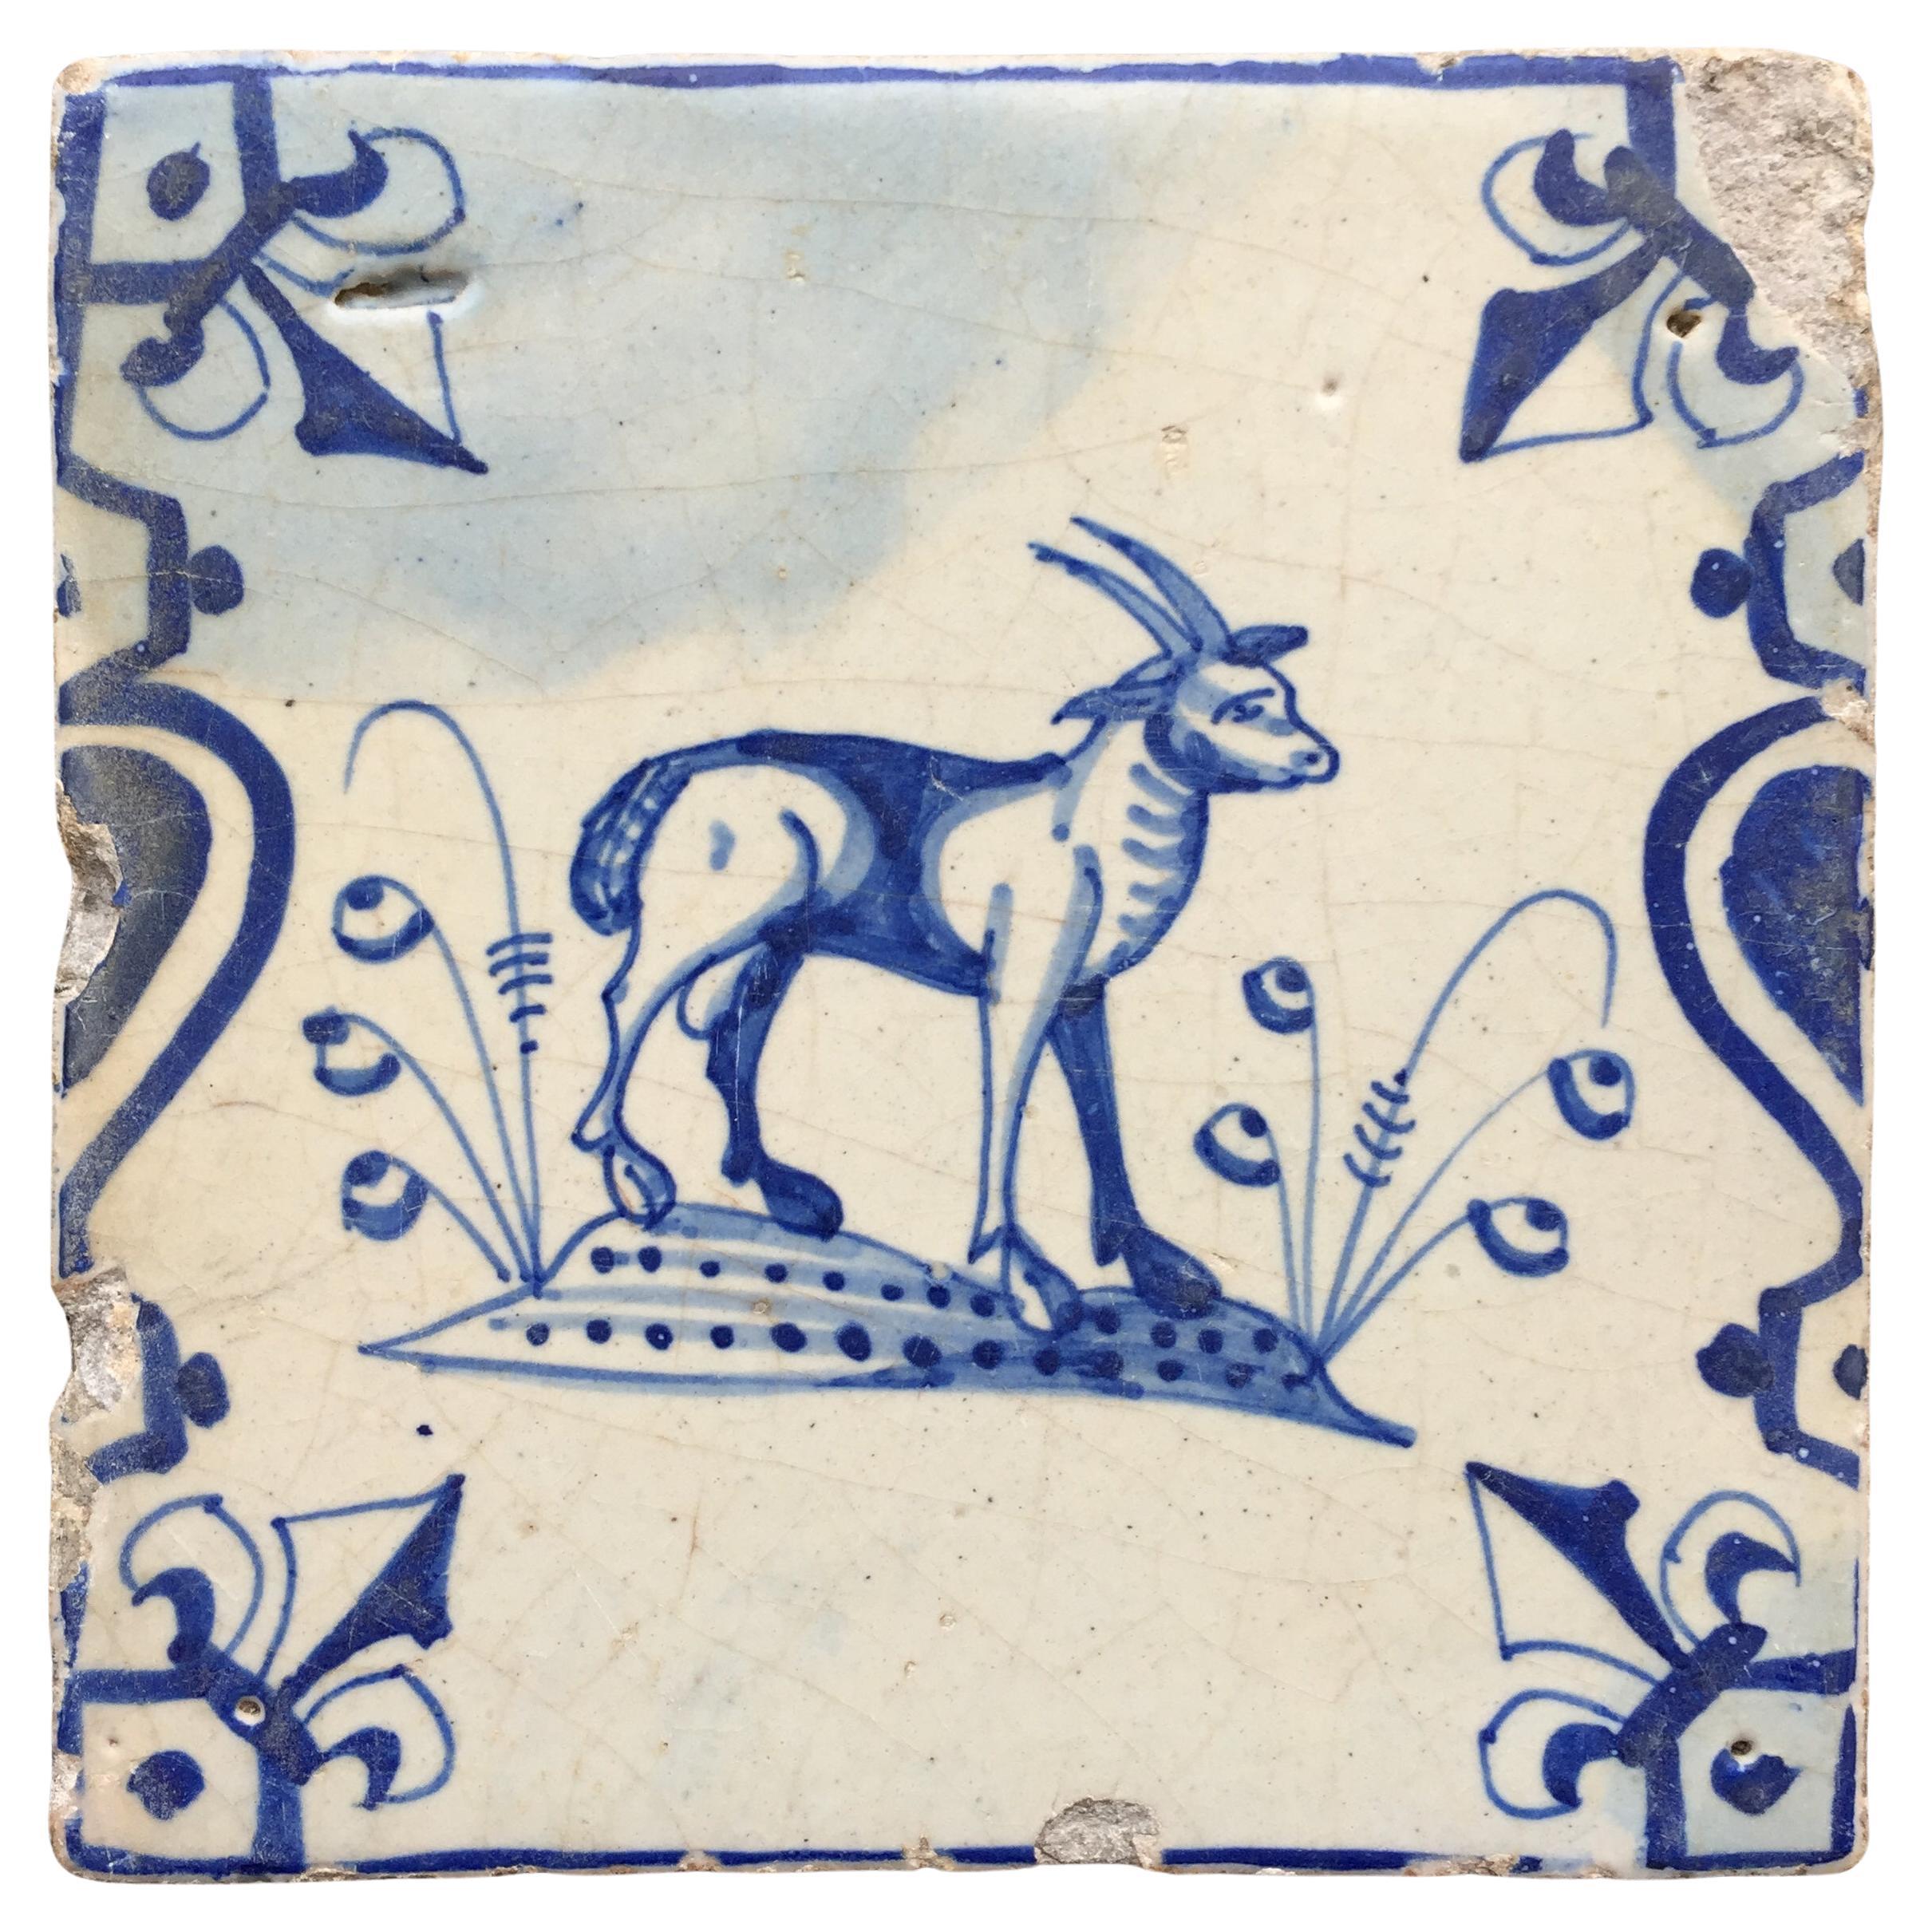 17th Century Dutch Delft Tile with decoration of a Goat For Sale